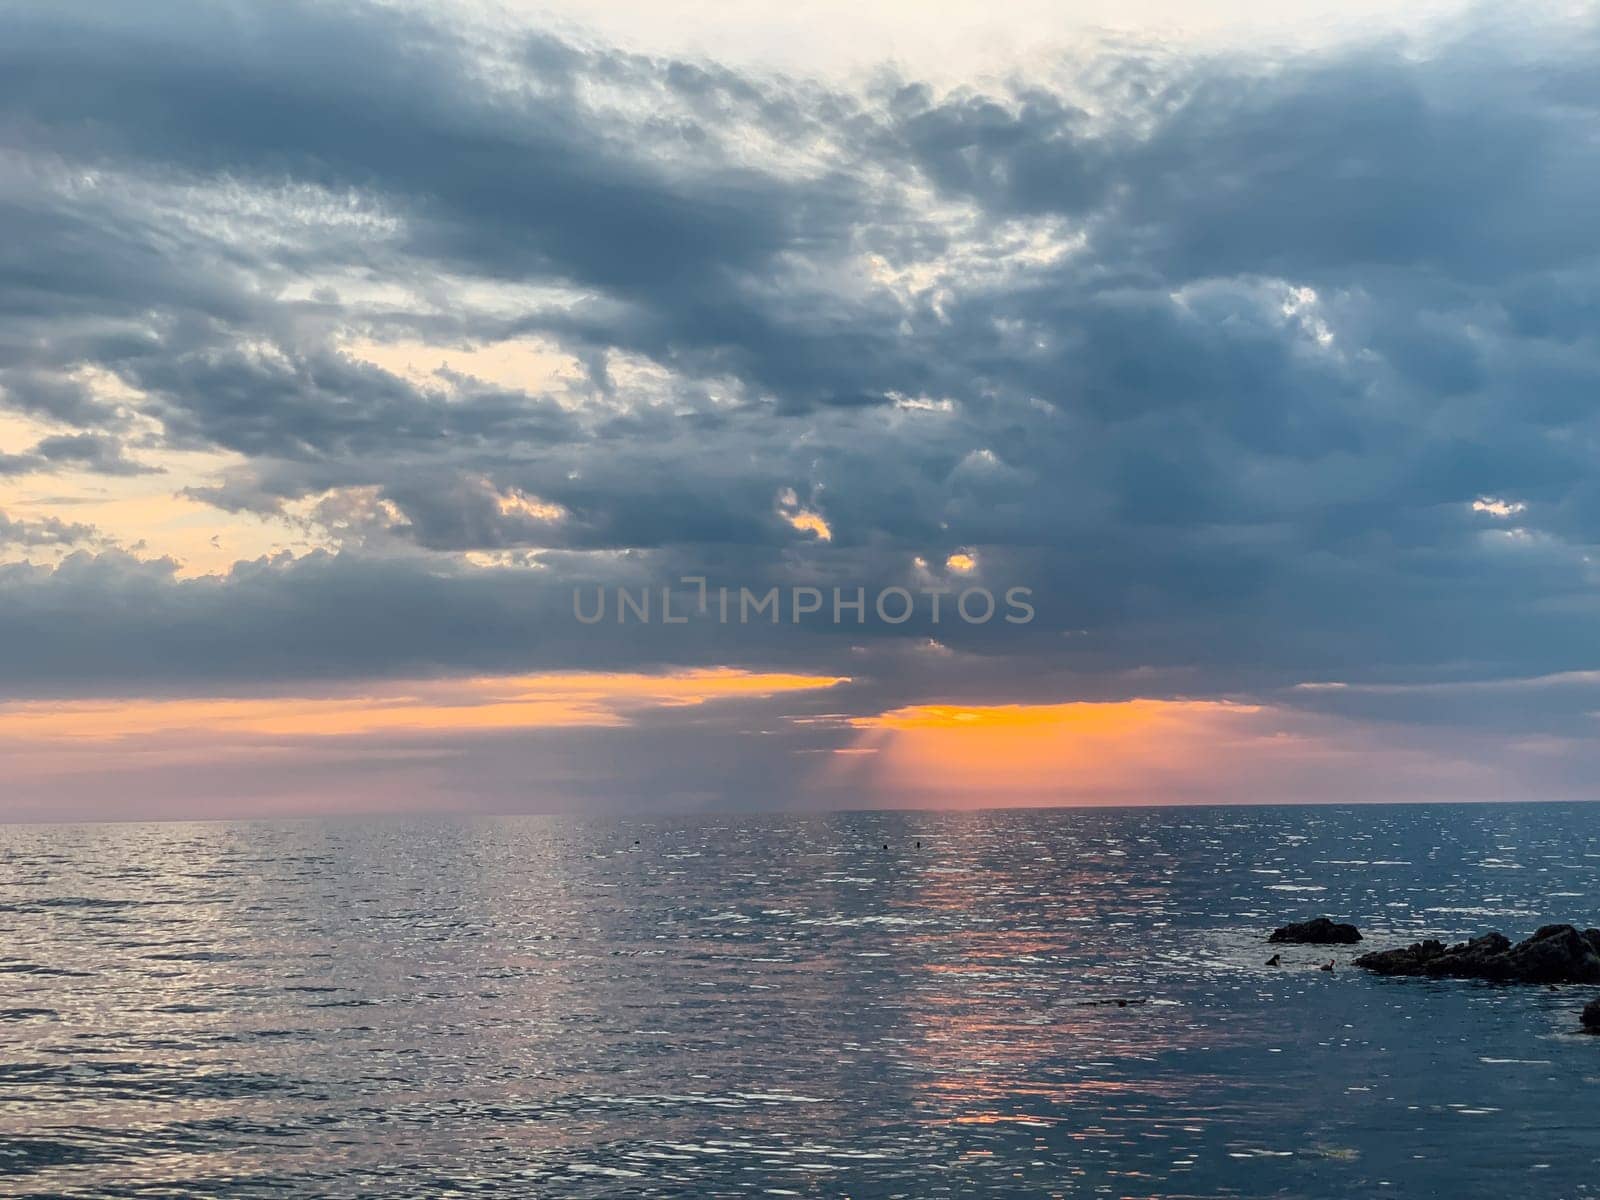 beautiful nature, calm sea, sky in the clouds, sea voyage, sunset by Simakov